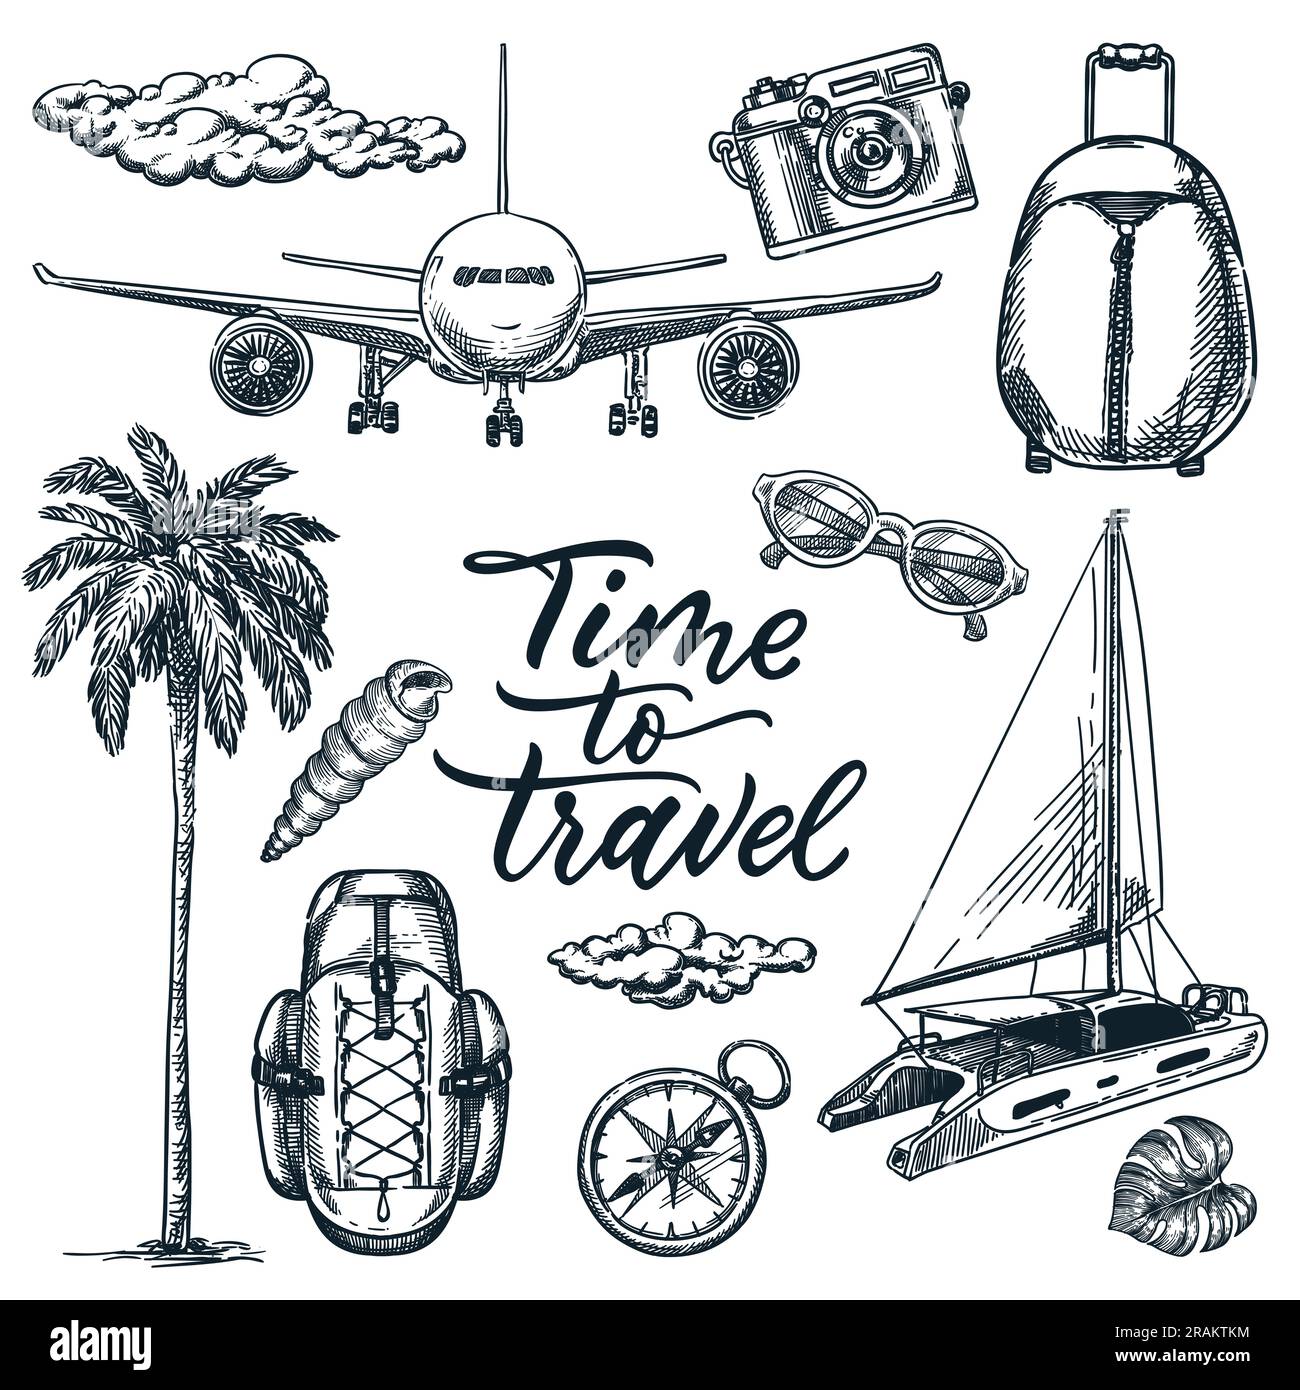 Time to travel calligraphy lettering and summer vacation design elements set. Vector doodle sketch illustration. Palm, backpack, plane, yacht, compass Stock Vector